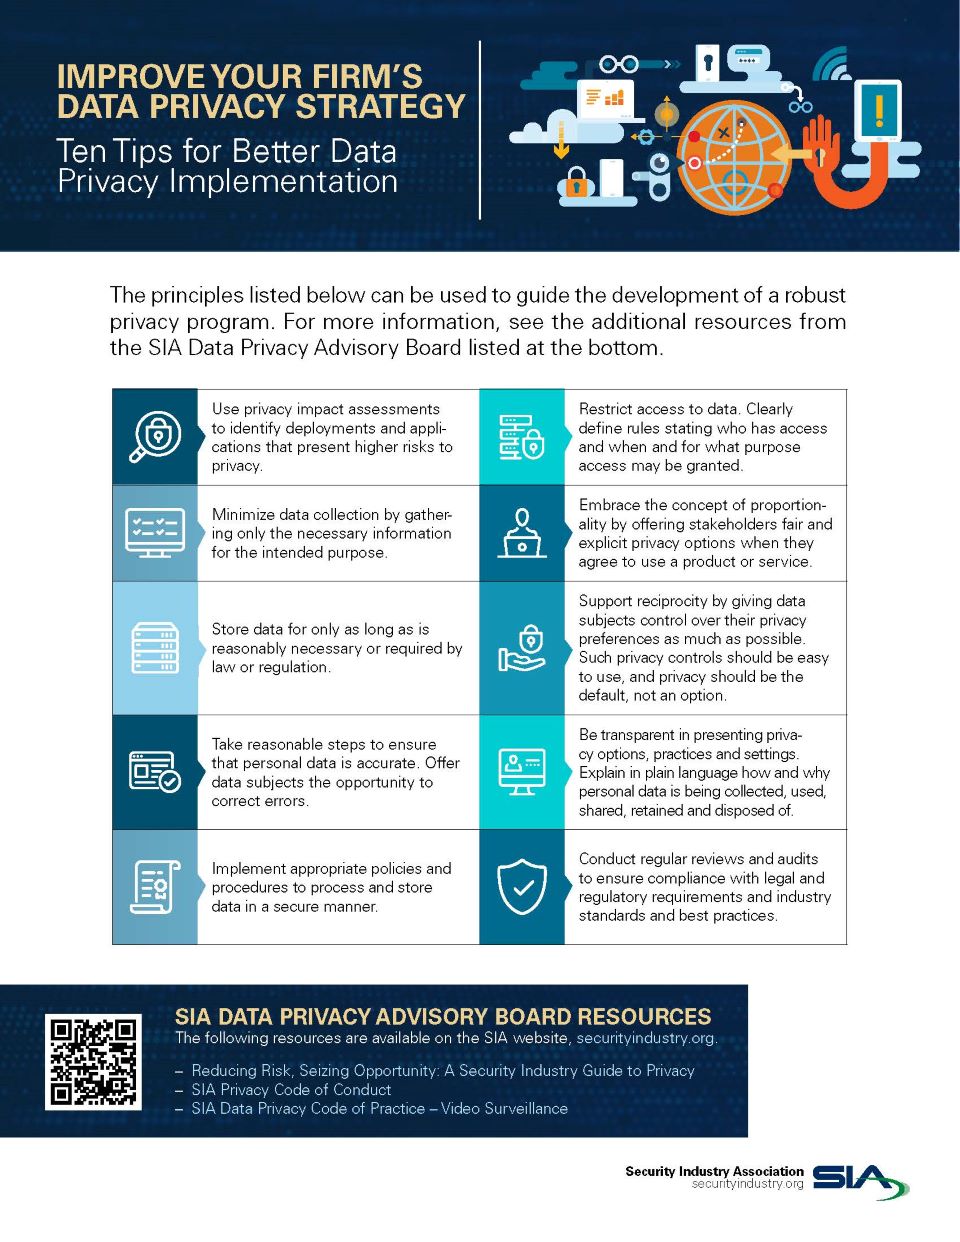 Infographic: Top 10 data privacy tips from SIA Data Privacy Advisory Board